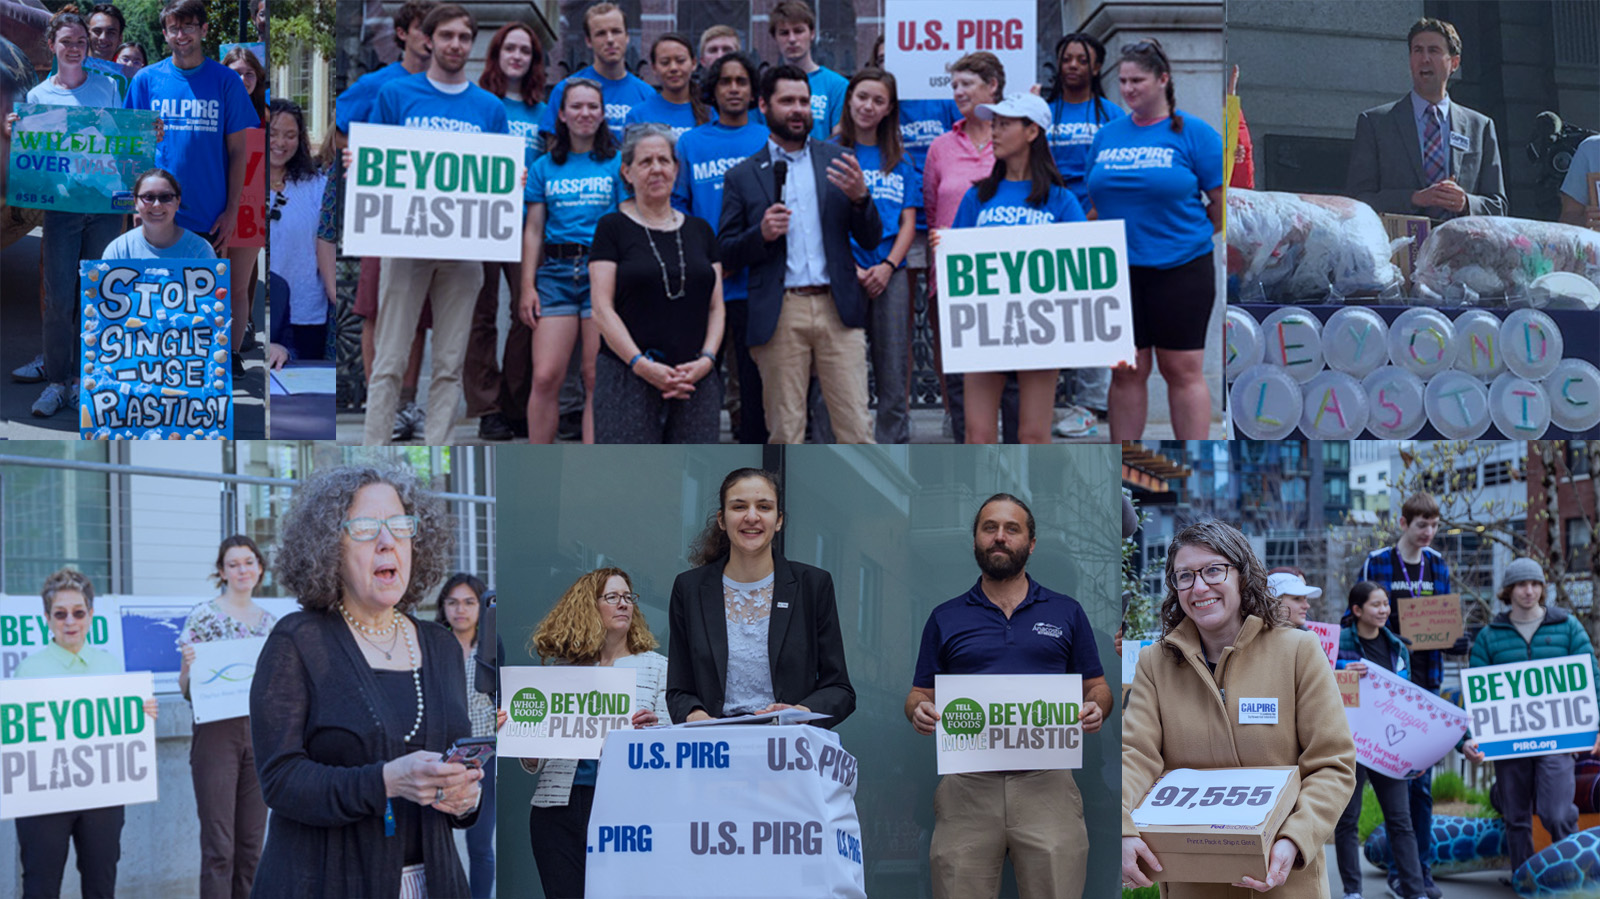 PIRG staff at Beyond Plastic campaign events